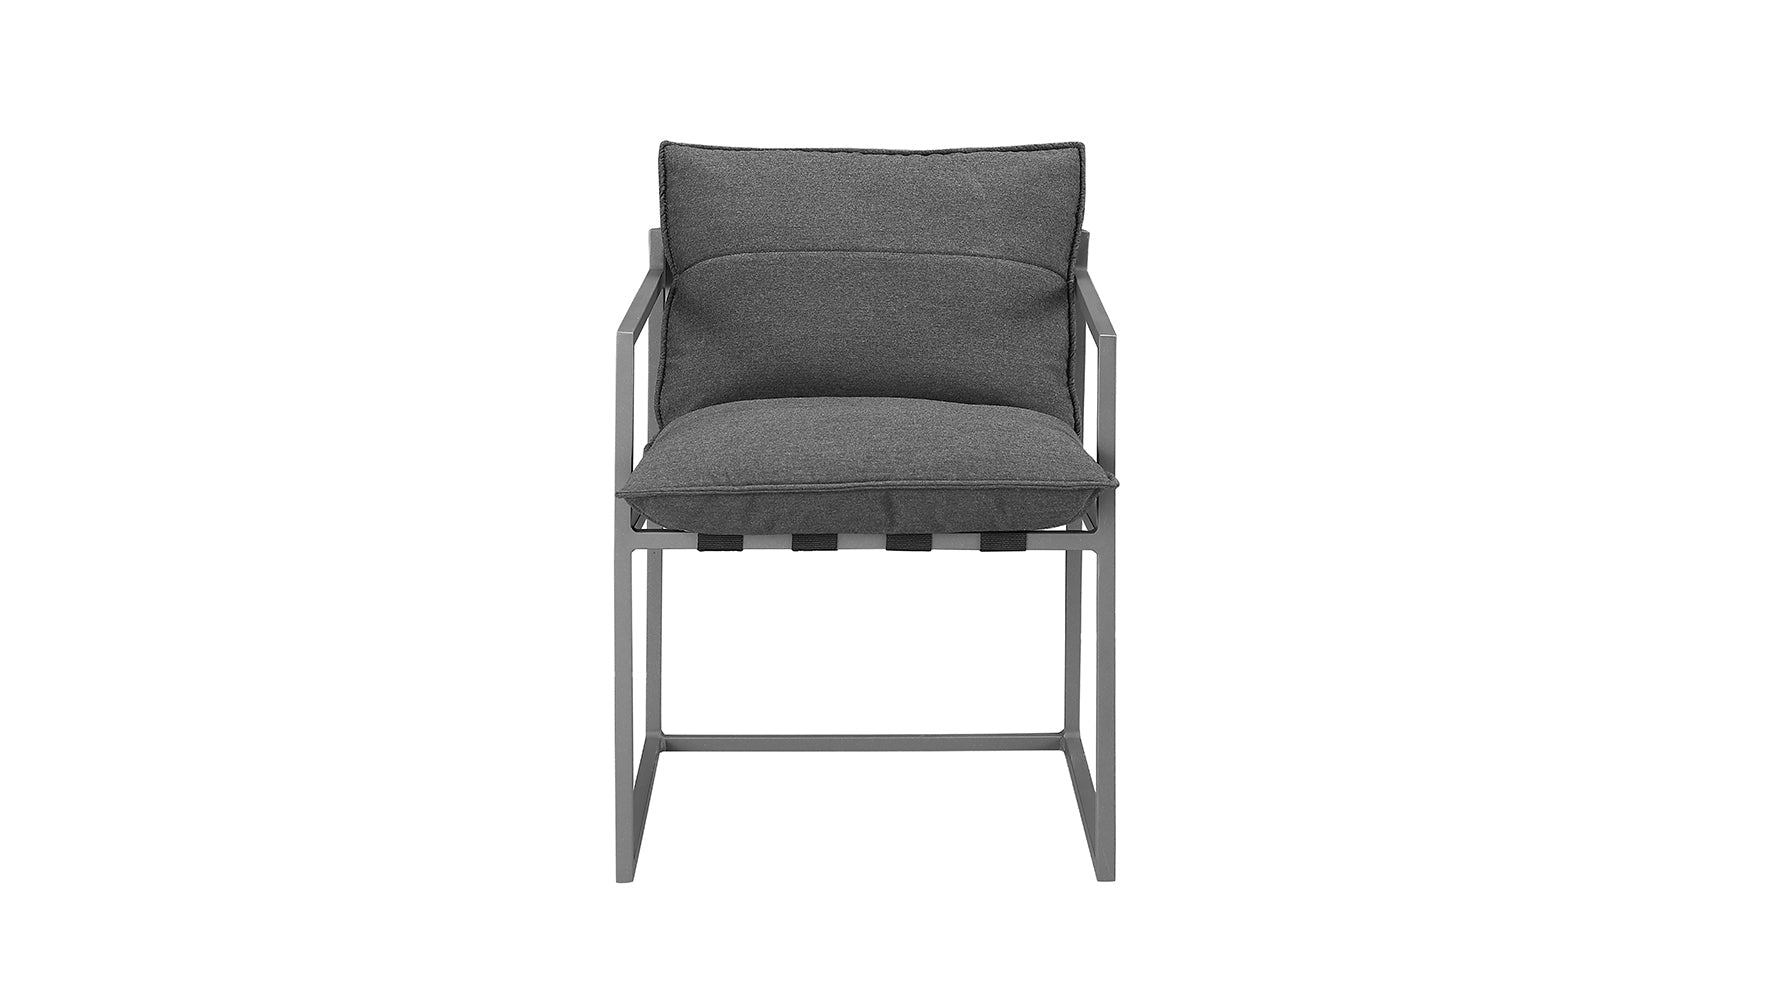 Come To Rest Outdoor Dining Chair, Soot - Image 1